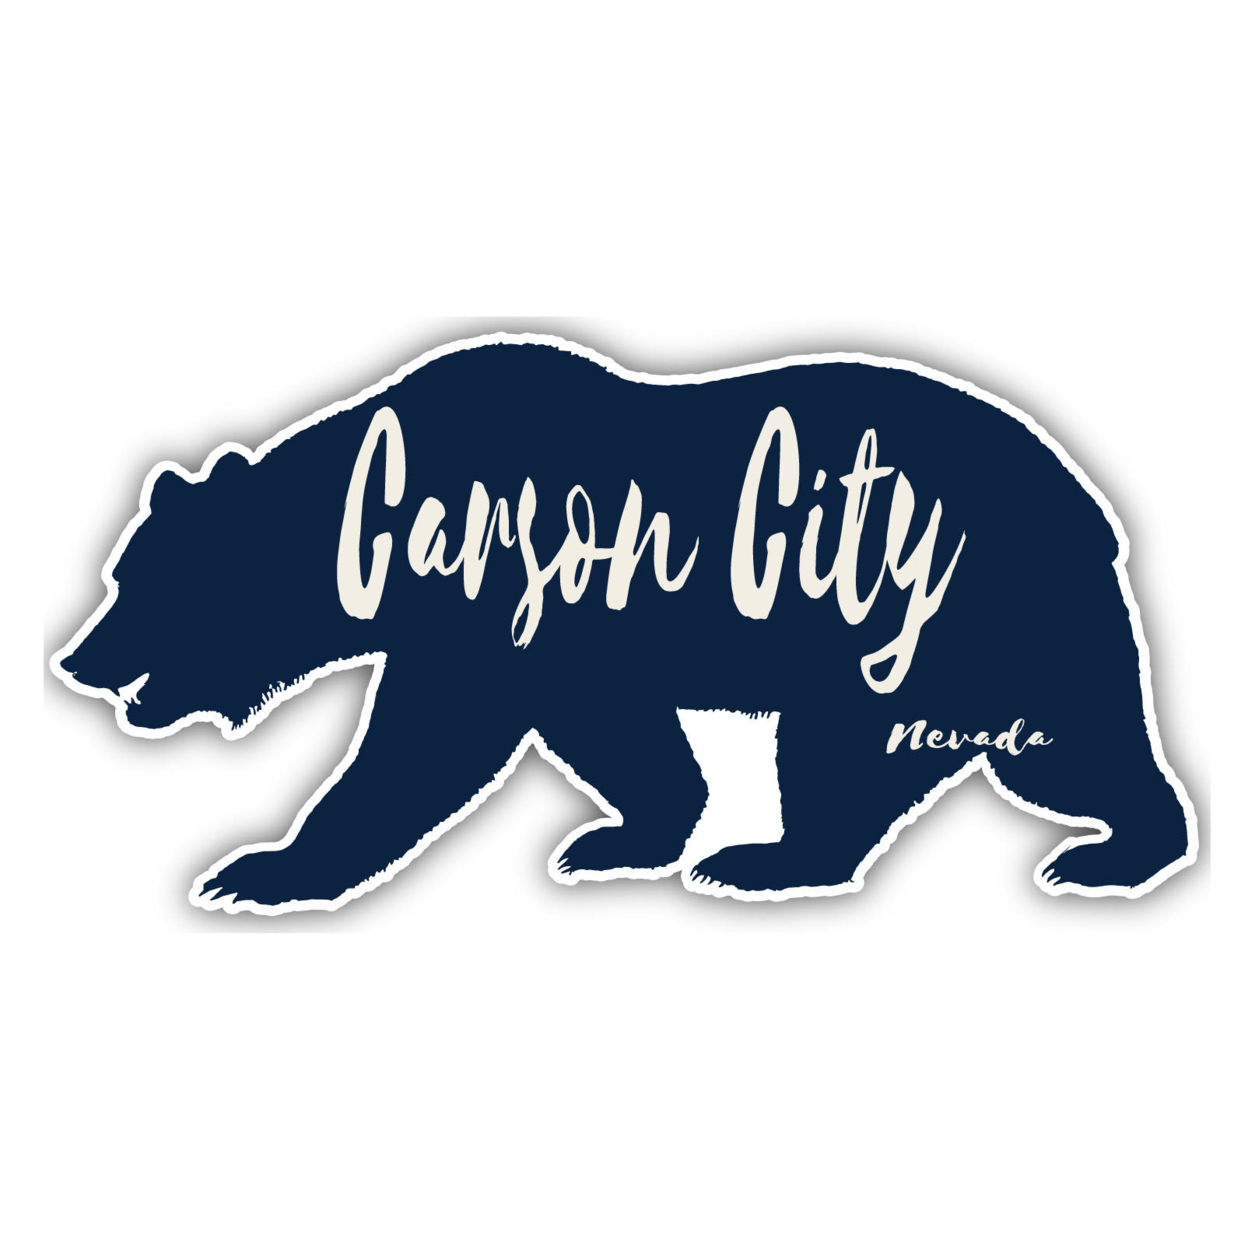 Carson City Nevada Souvenir Decorative Stickers (Choose Theme And Size) - 4-Pack, 2-Inch, Tent